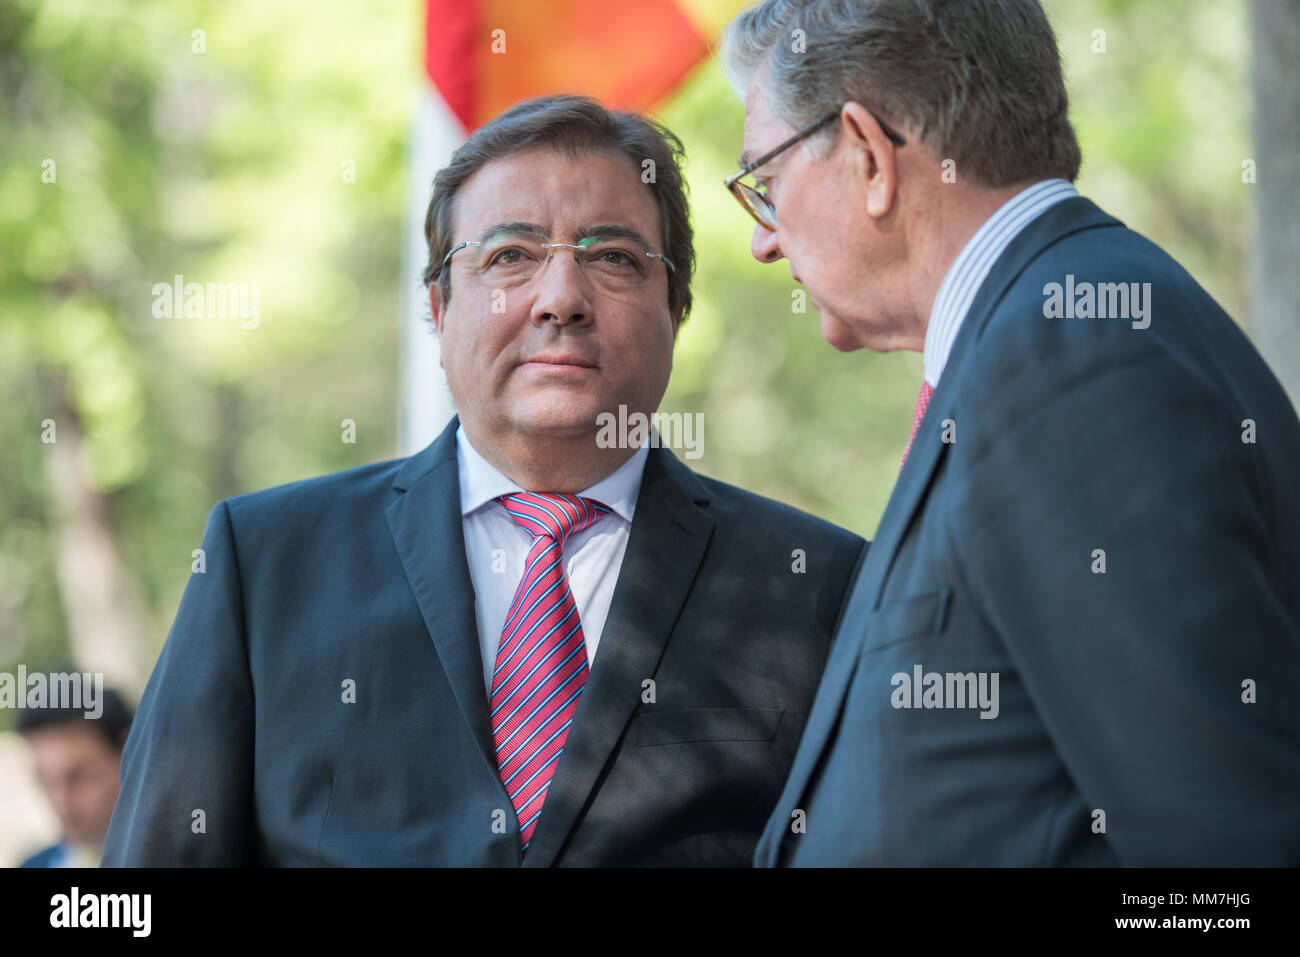 Monasterio de Yuste, Cuacos de Yuste, Spain. 9th May, 2018 - (l) Guillermo Fernández Vara Spanish politician from the Spanish Socialist Workers' Party and President of Extremadura since 2015 arrived to the Carlos V Award ceremony where Antonio TAJANI, European Parliament received from Felipe VI, King of Spain the Carlos V Prize. Credit: Esteban Martinena Guerrero/Alamy Live News Stock Photo